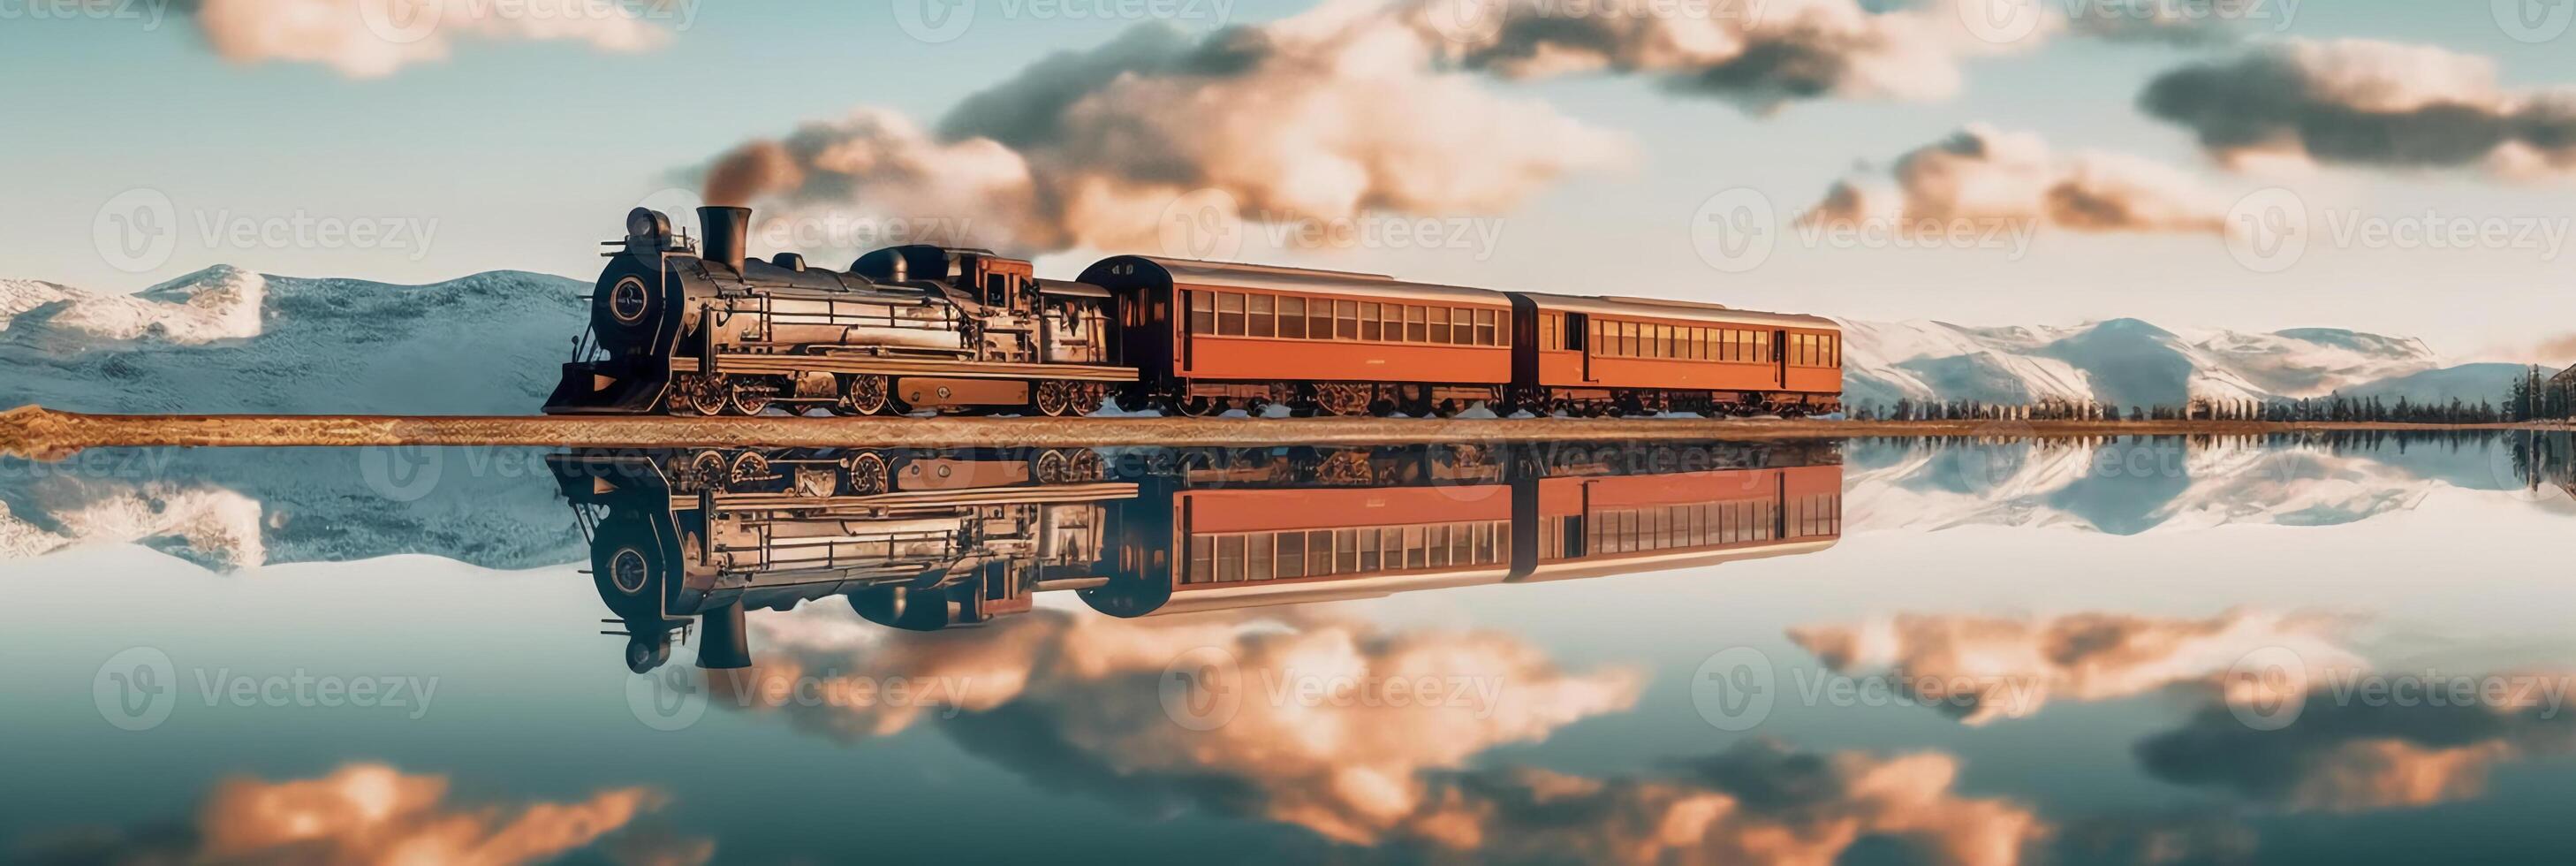 A train is traveling on lake, water surface reflects the sky. photo